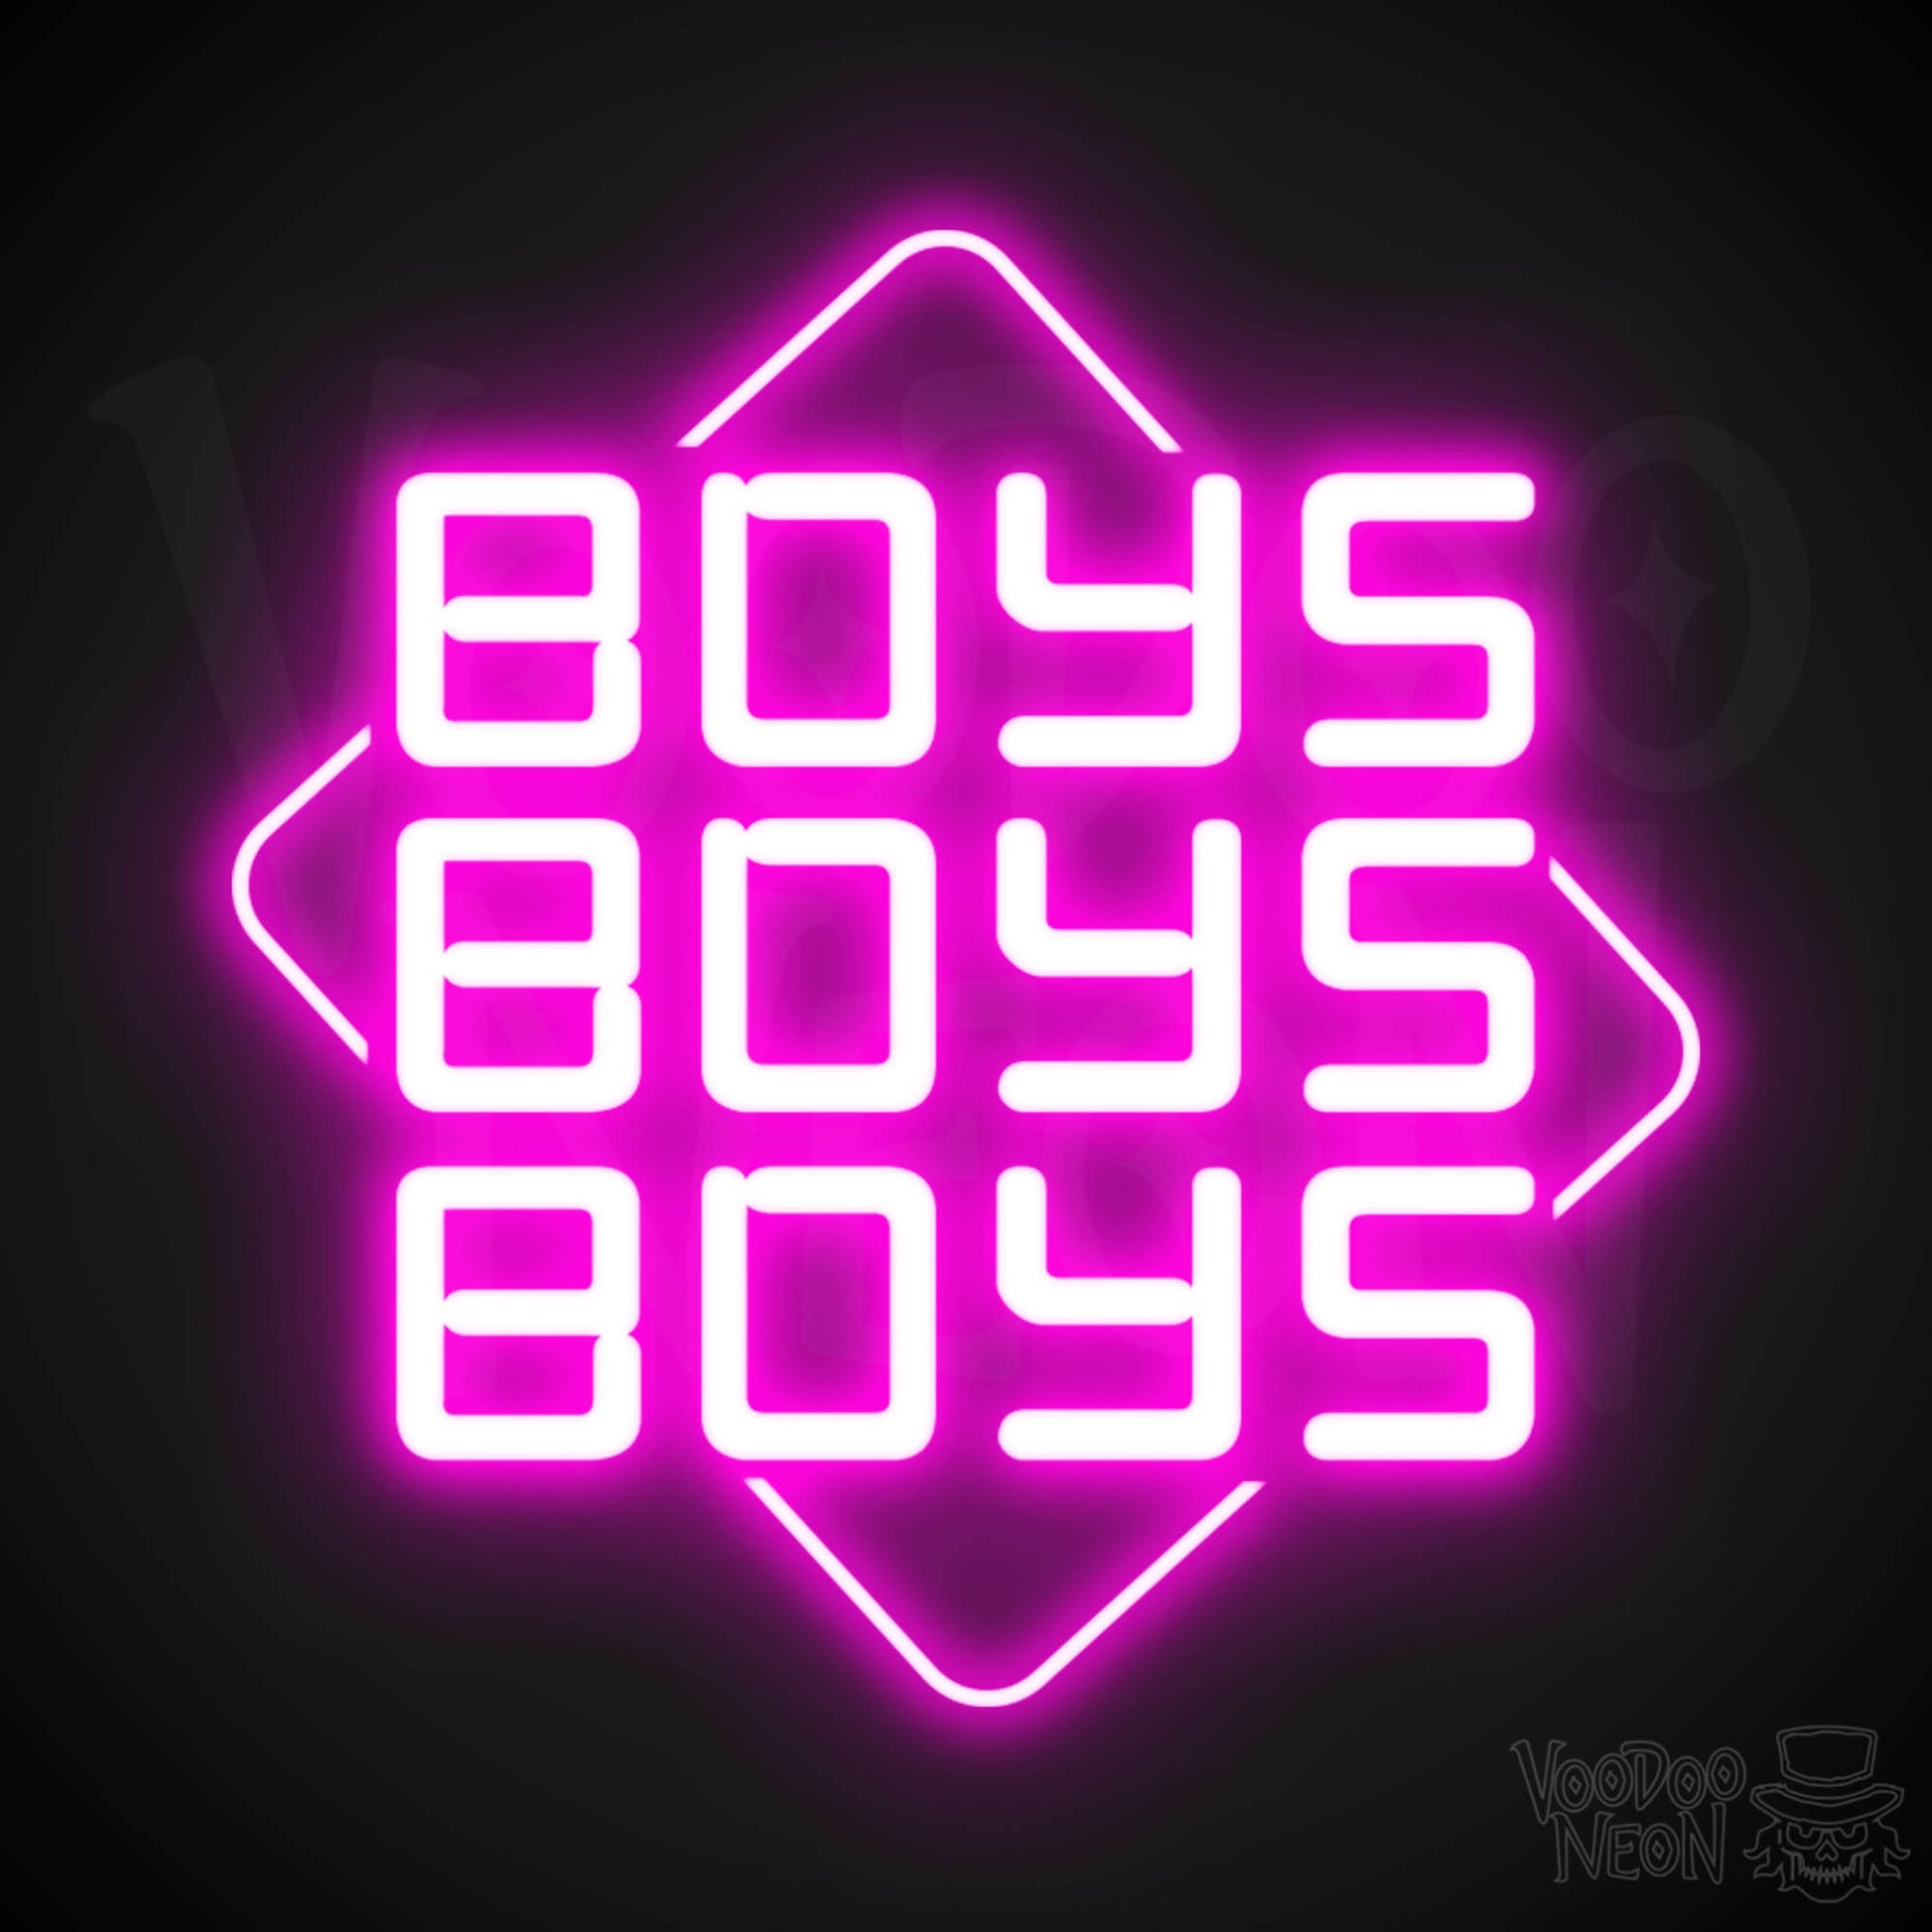 Boys Boys Boys Neon Sign - Neon Boys Boys Boys Sign - Neon Wall Art - Color Pink